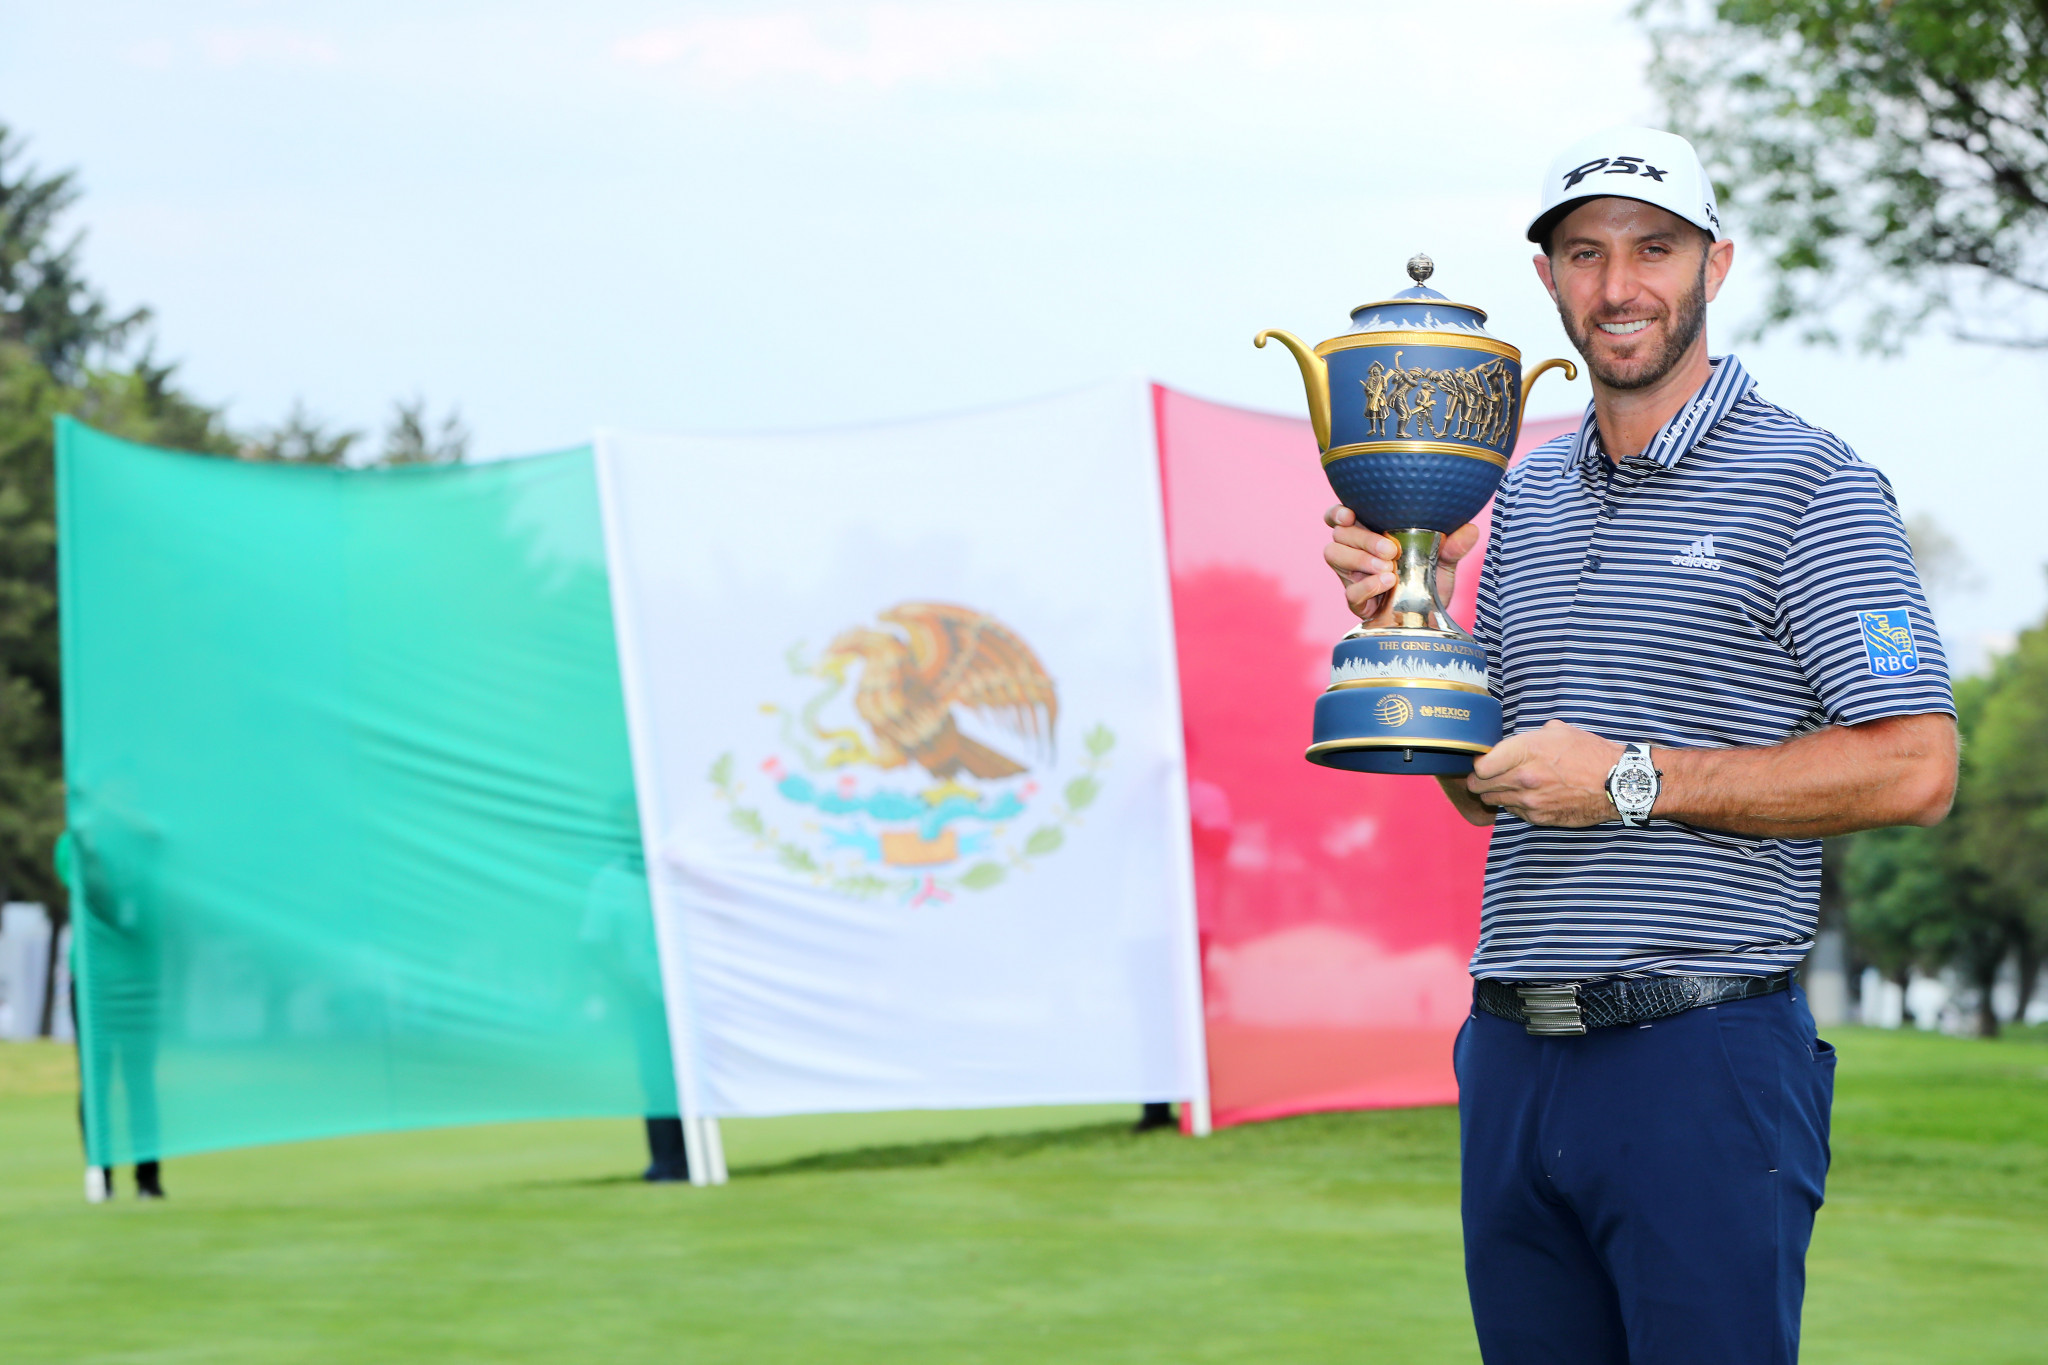 World number three Dustin Johnson won the WGC Mexico Championship ©Getty Images